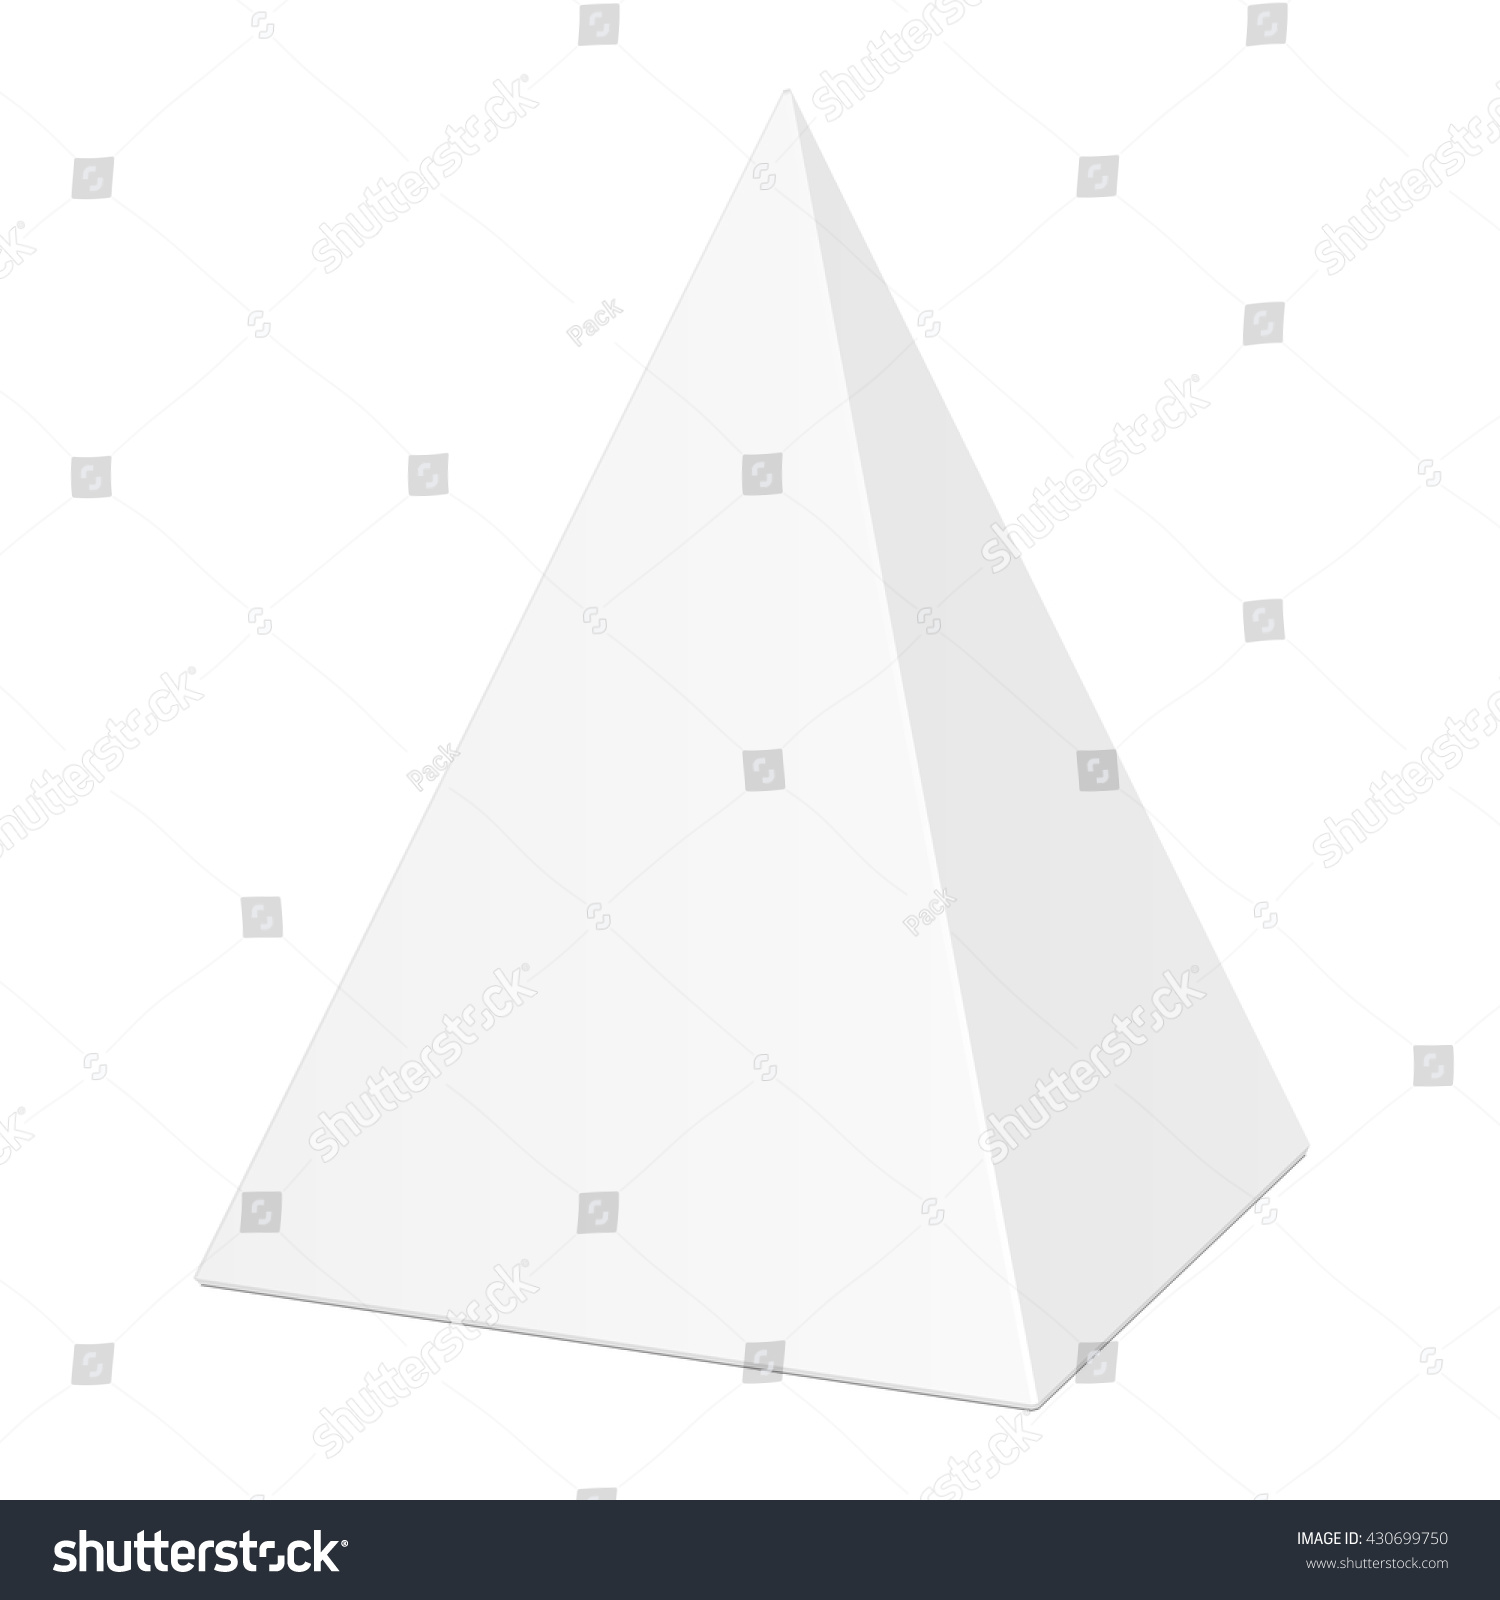 Download White Cardboard Pyramid Triangle Box Packaging Stock Vector 430699750 - Shutterstock